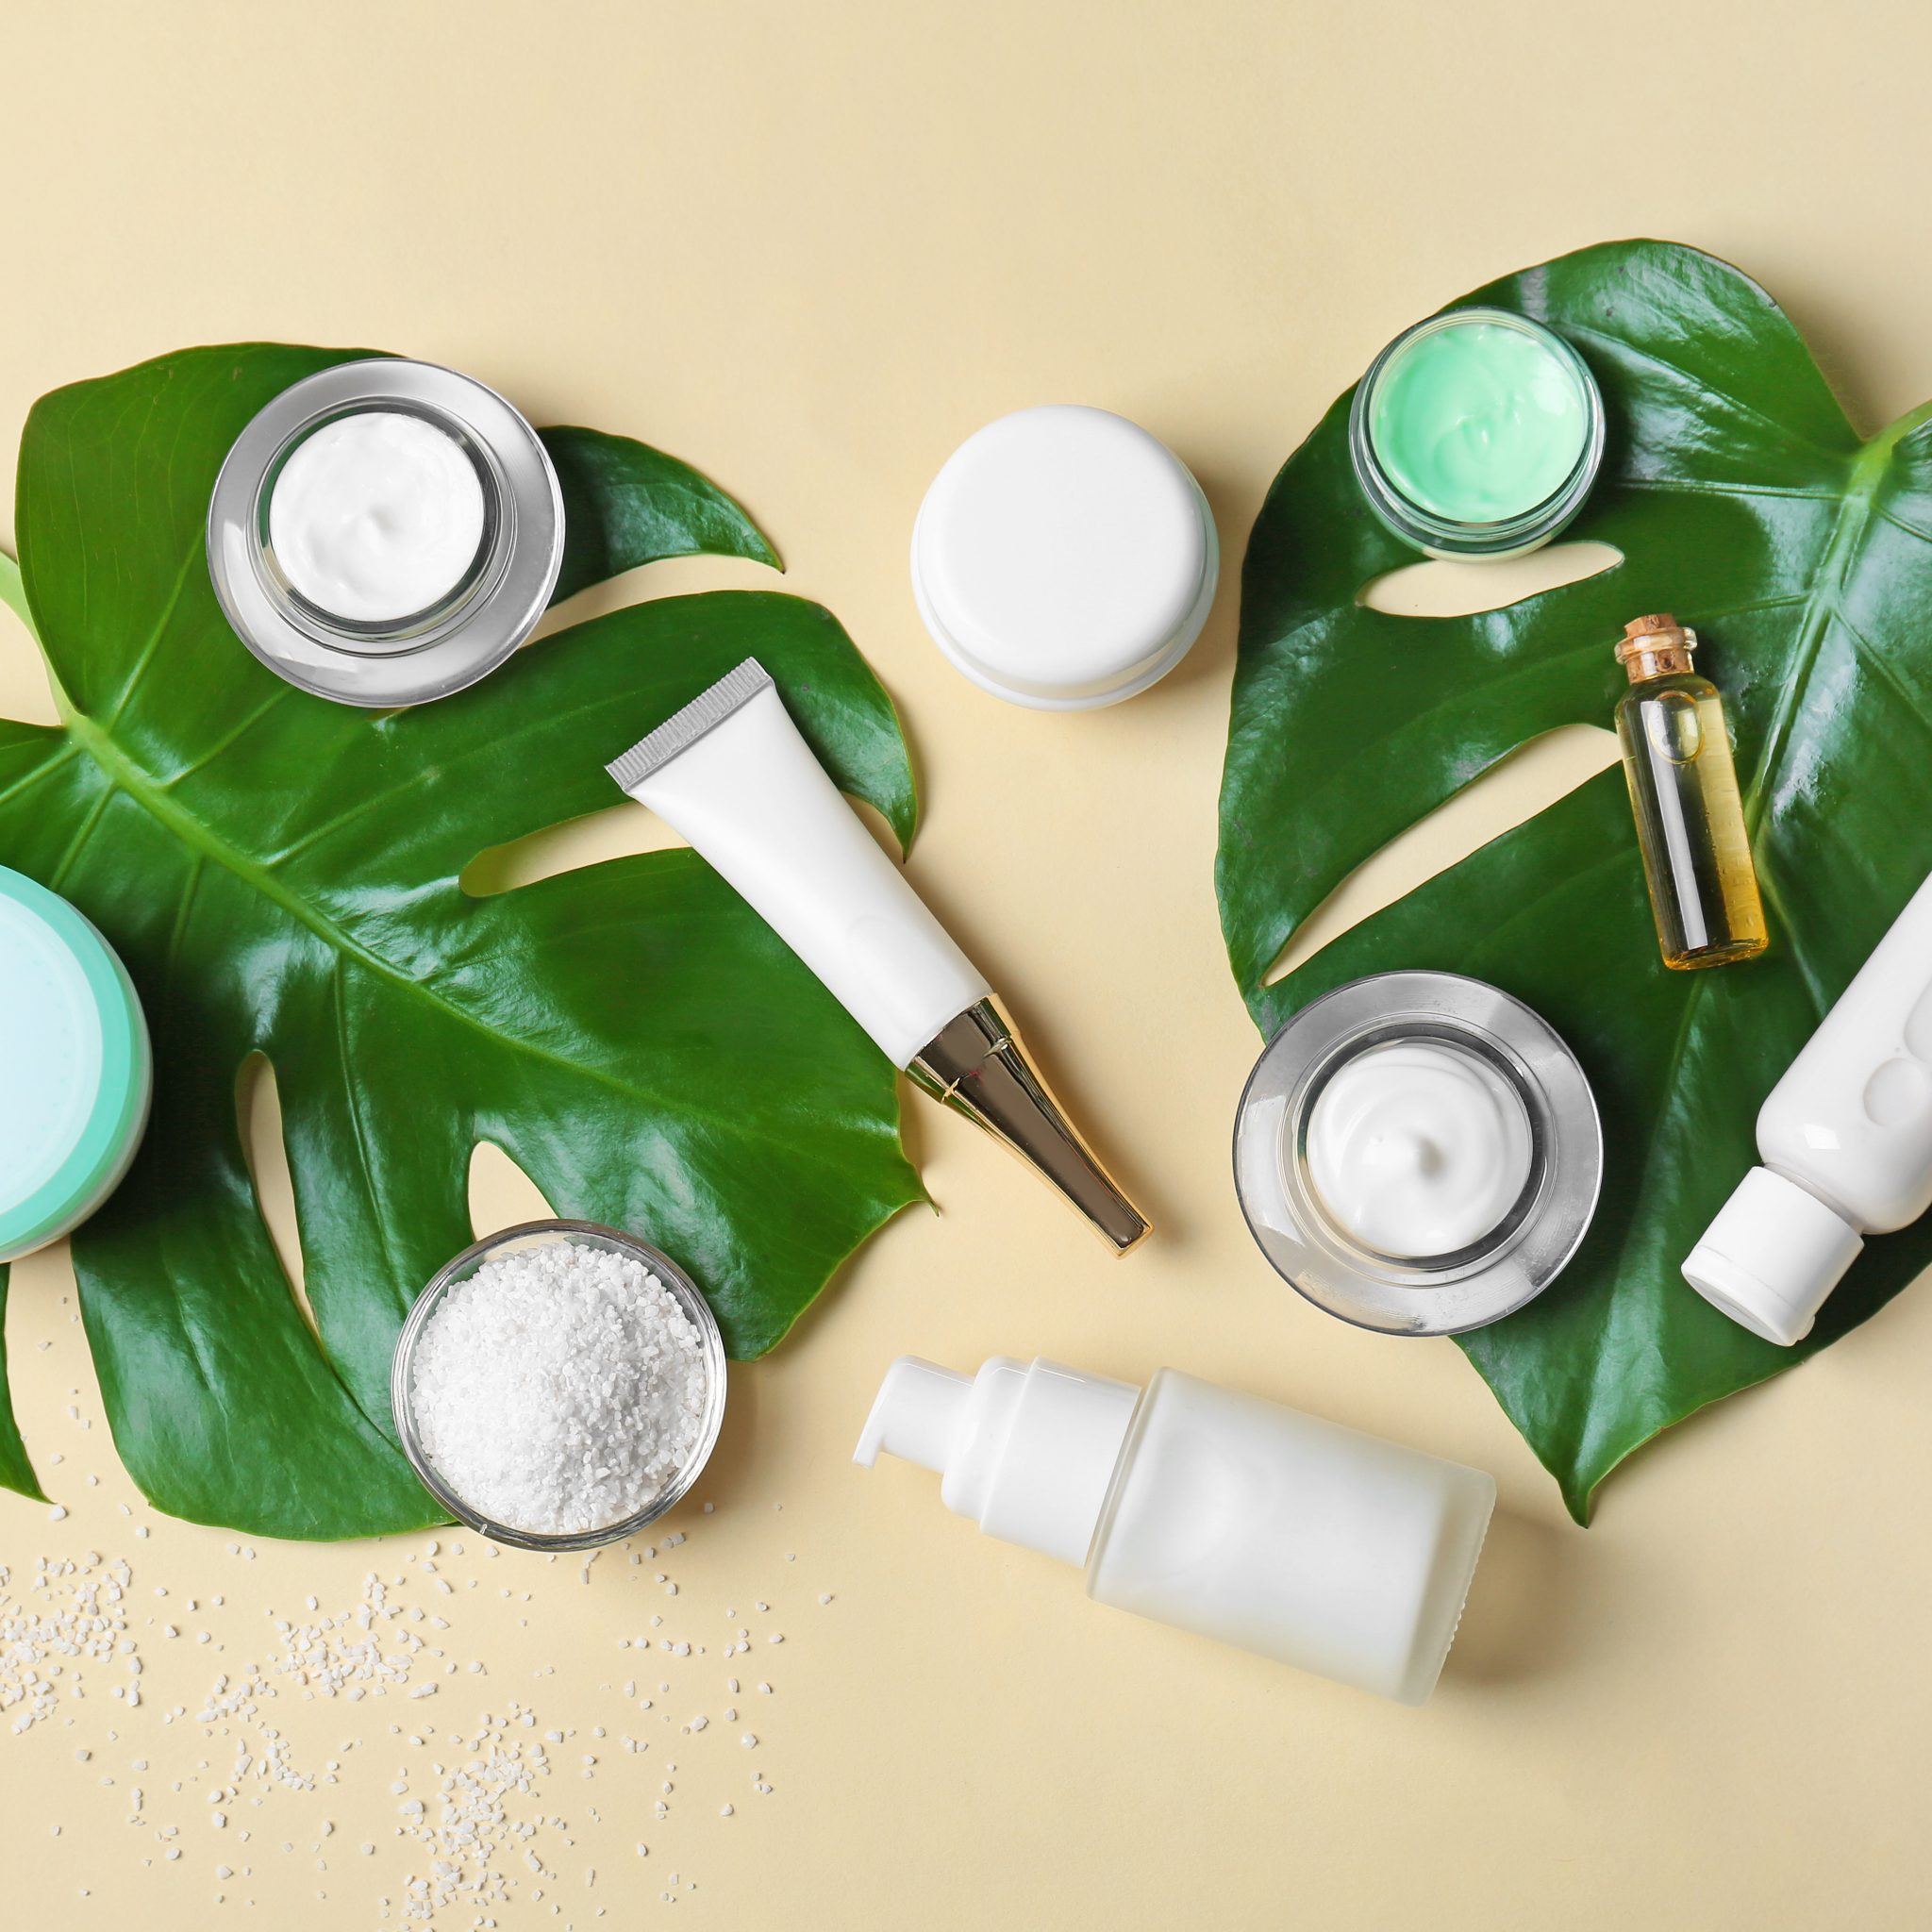 Natural cosmetics and leaves on light background